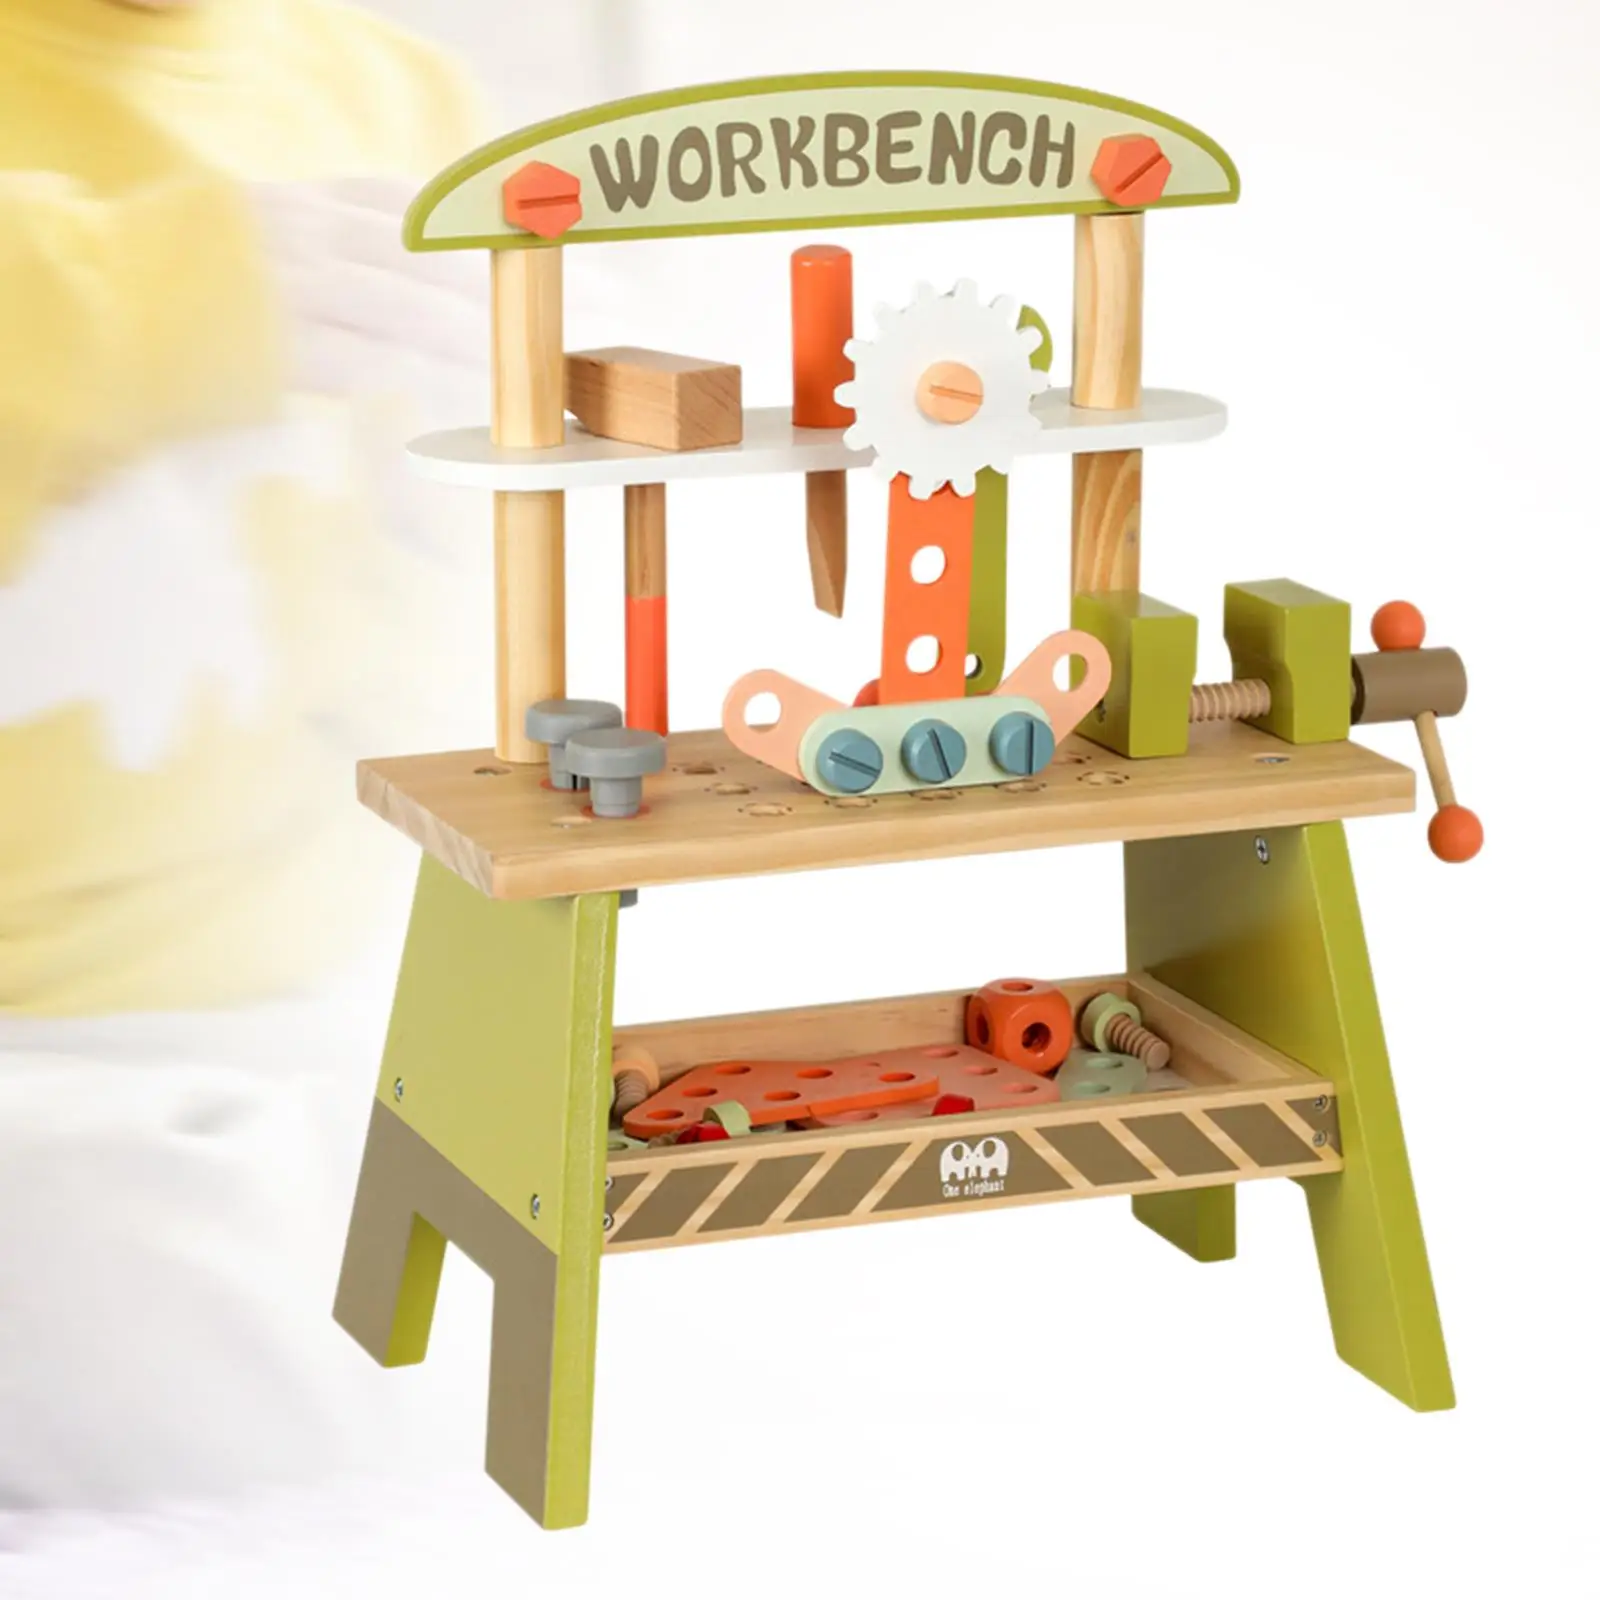 Pretend Play Construction Toy DIY Kid`s Wooden Tool Bench Toy for Child Holiday Present Ages 3+ Christmas Gifts Easy to Assemble